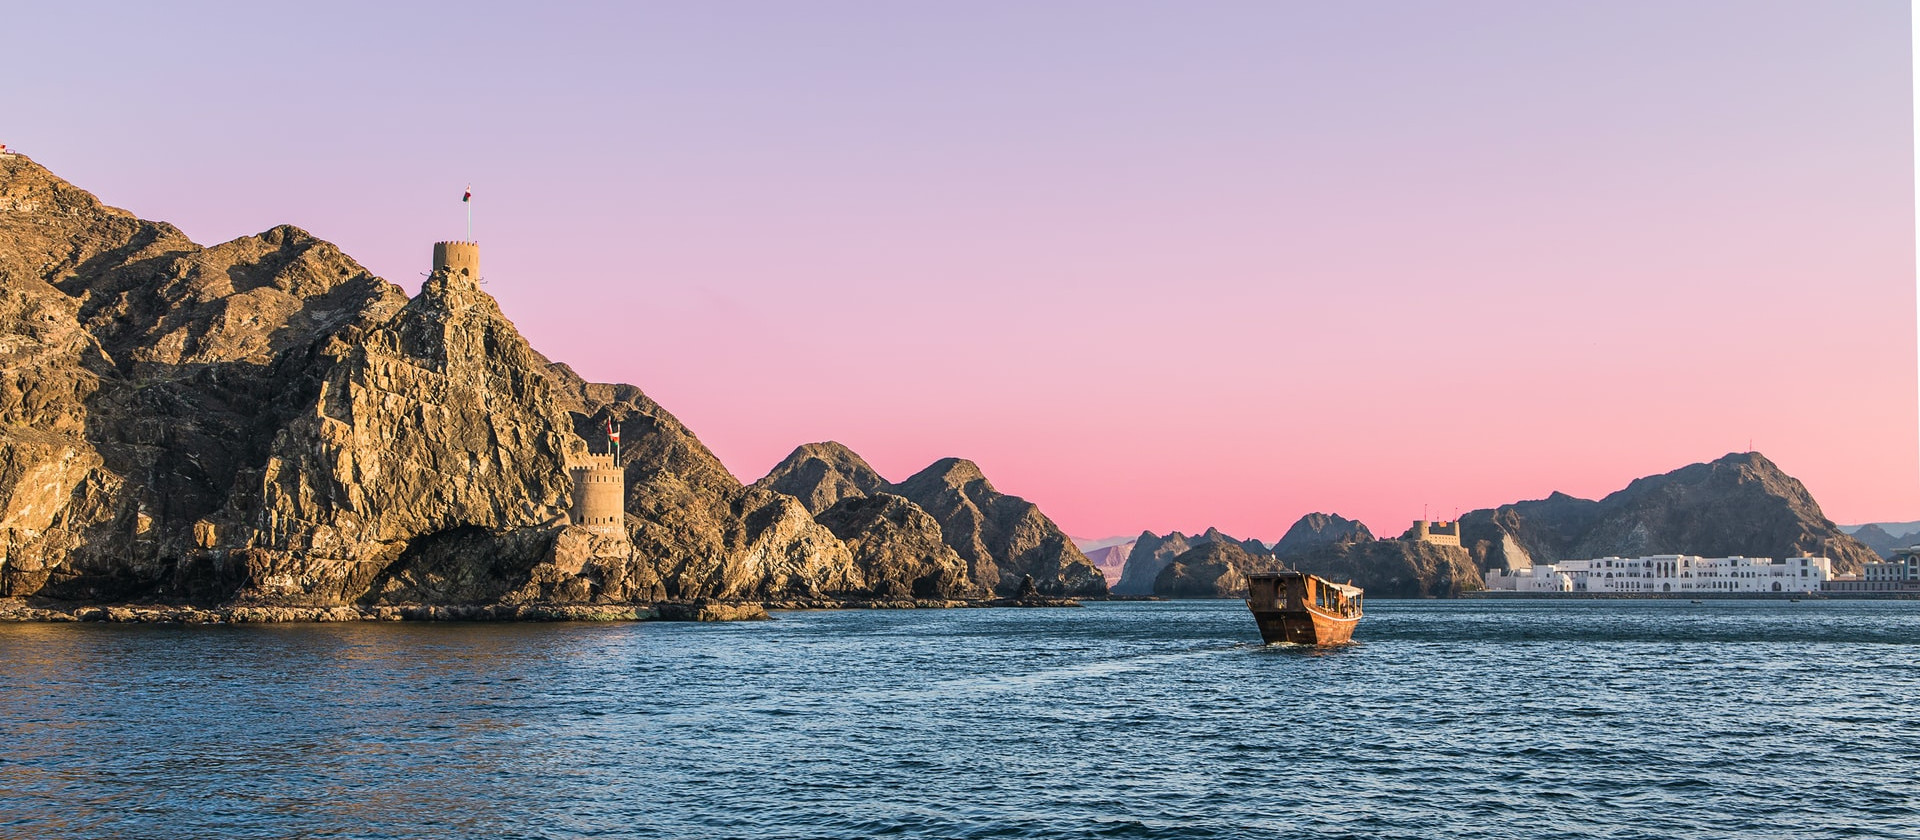 Traditional boat on the sea near cliffs with pink sunset, Oman